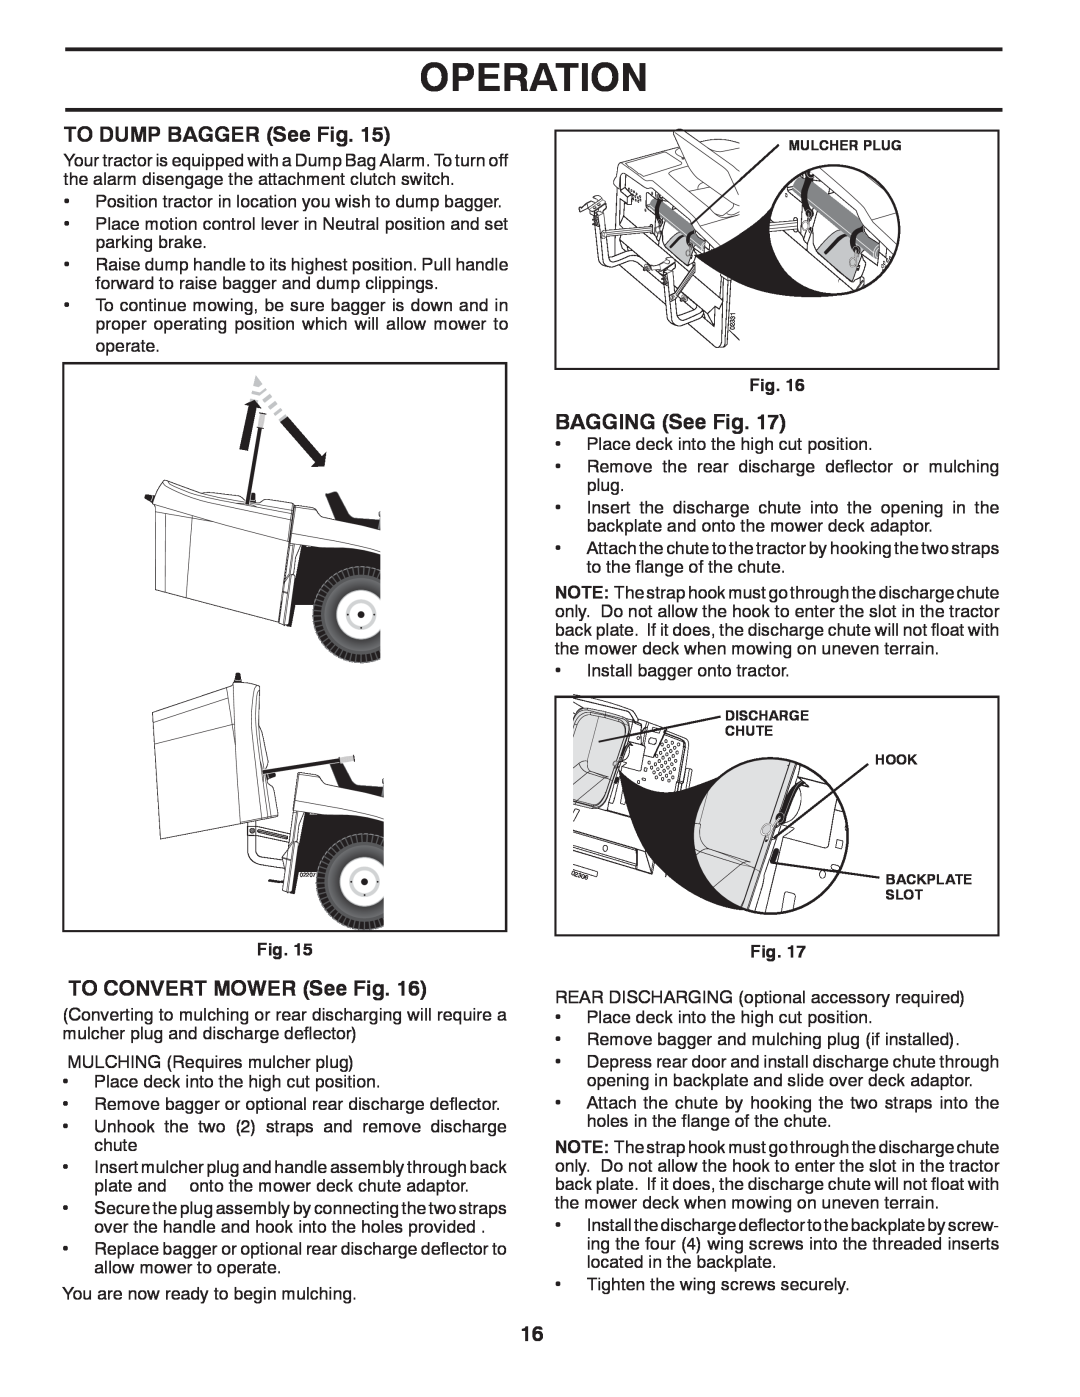 Jonsered LT2220 CMA2 manual TO DUMP BAGGER See Fig, TO CONVERT MOWER See Fig, BAGGING See Fig, Operation 